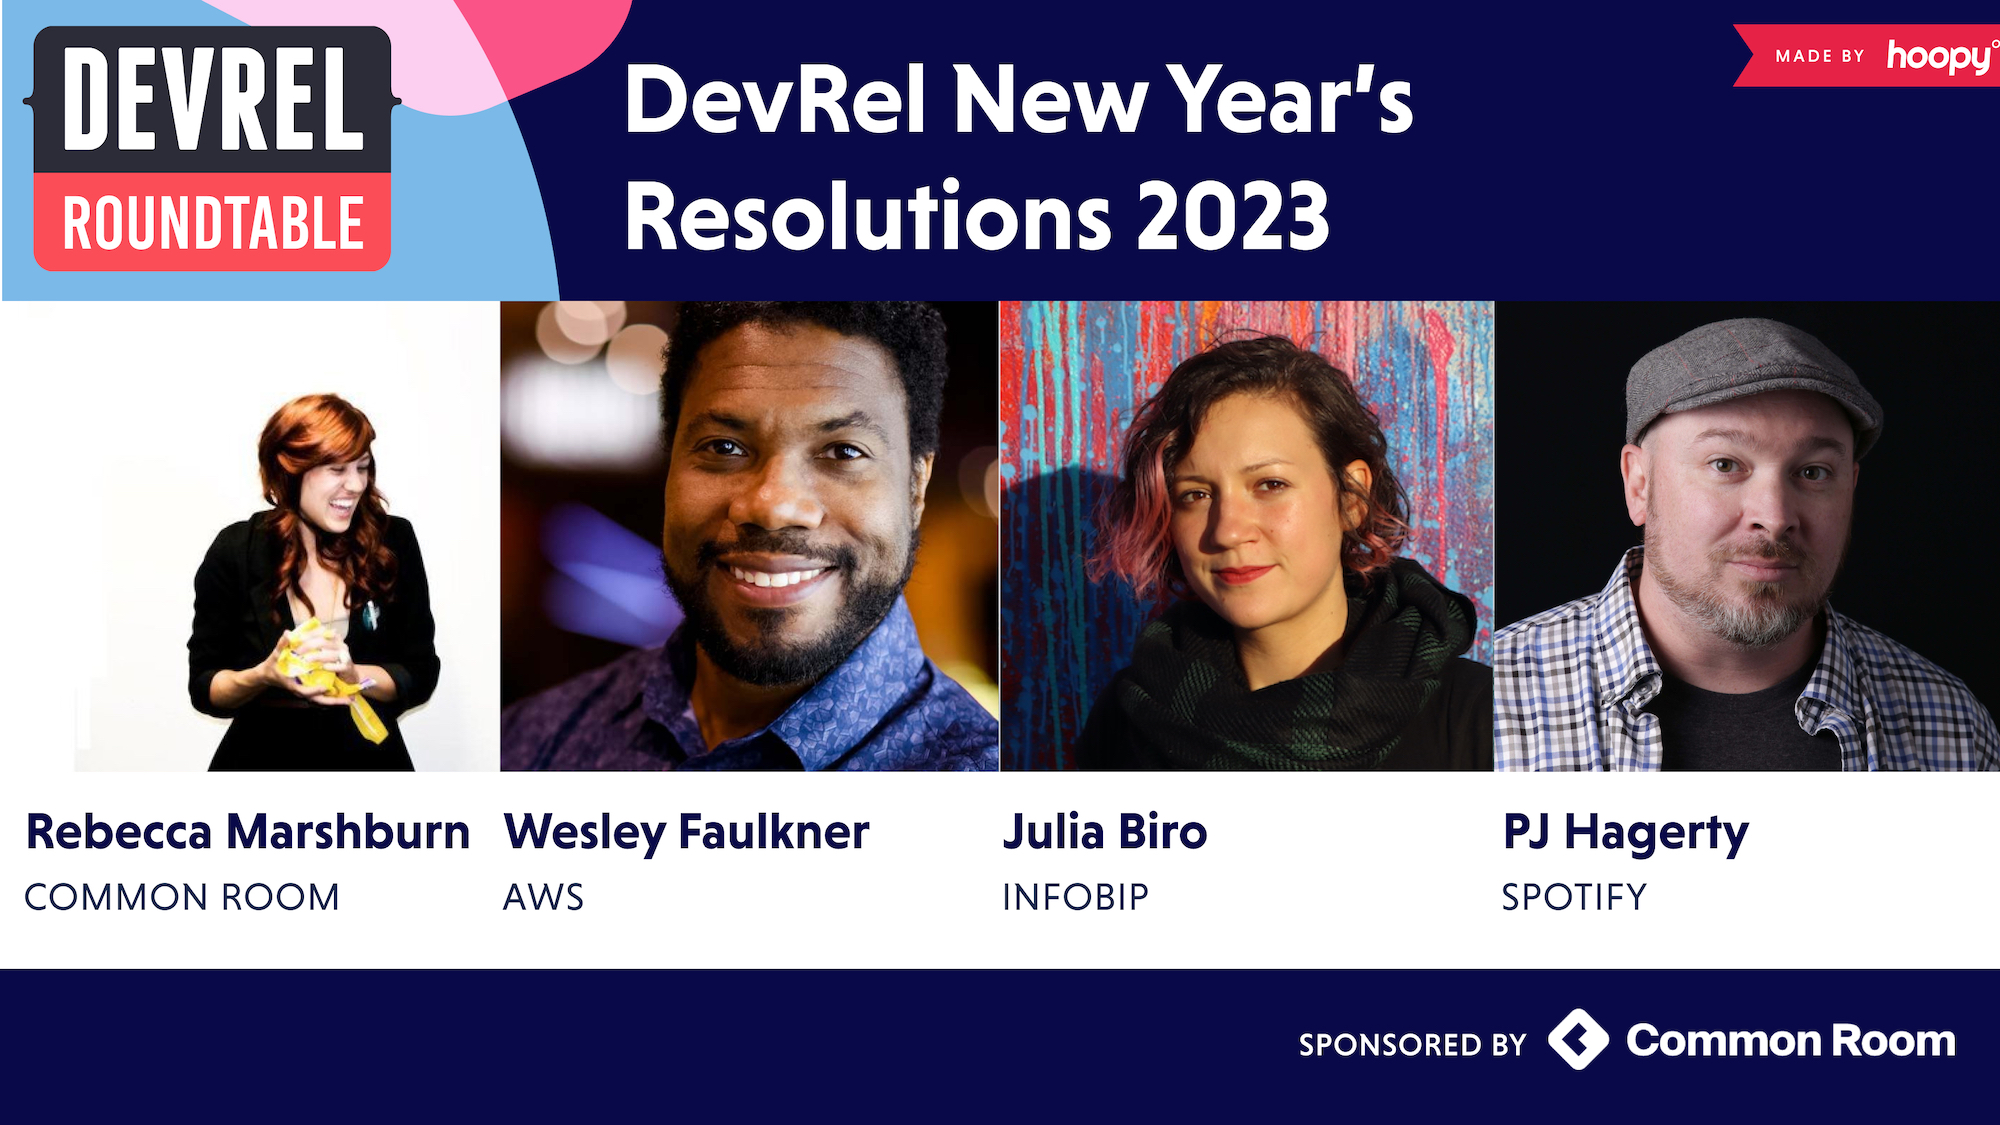 DevRel New Year's resolutions roundtable